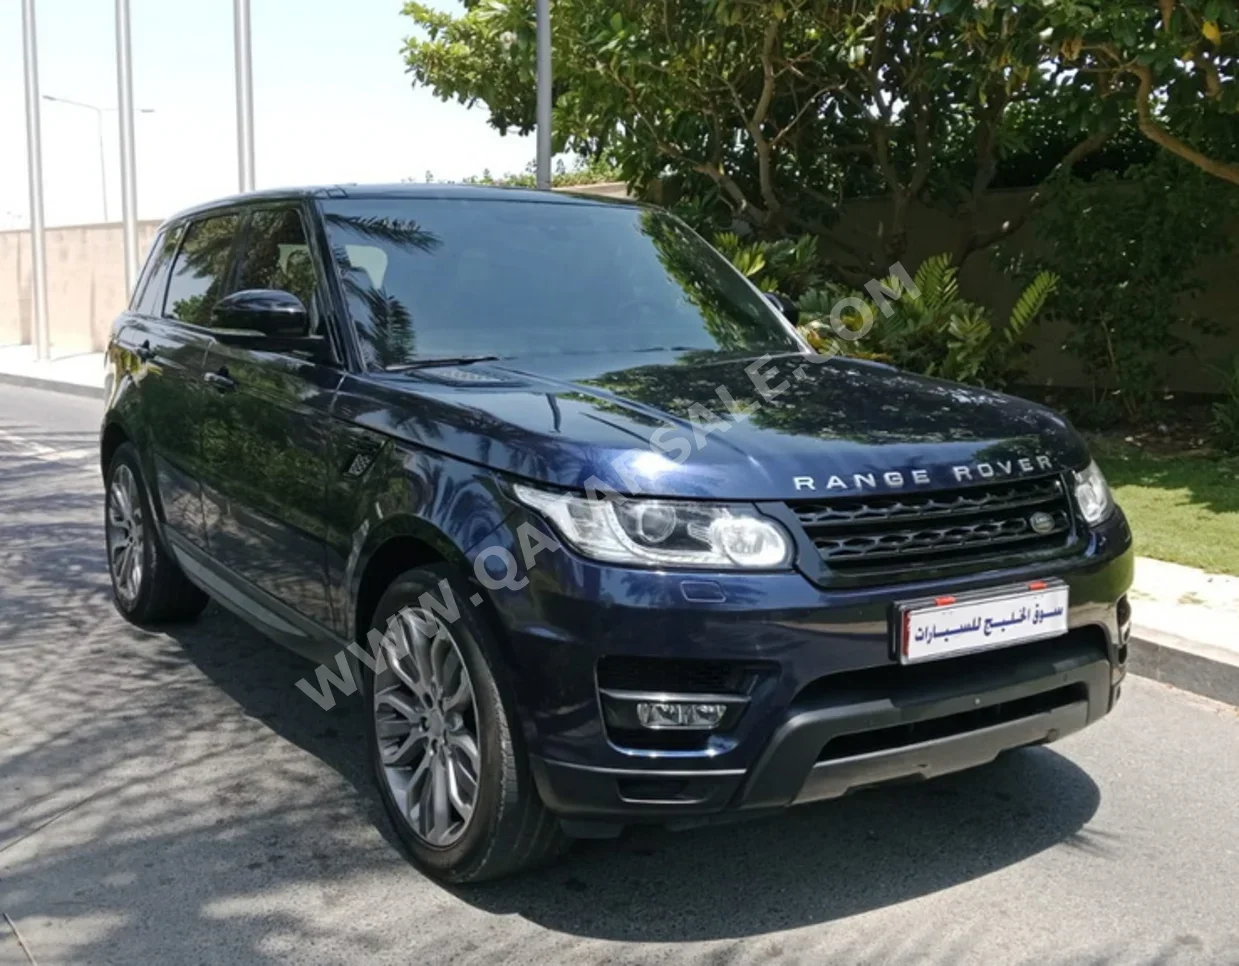 Land Rover  Range Rover  Sport  2016  Automatic  133,000 Km  8 Cylinder  Four Wheel Drive (4WD)  SUV  Dark Blue